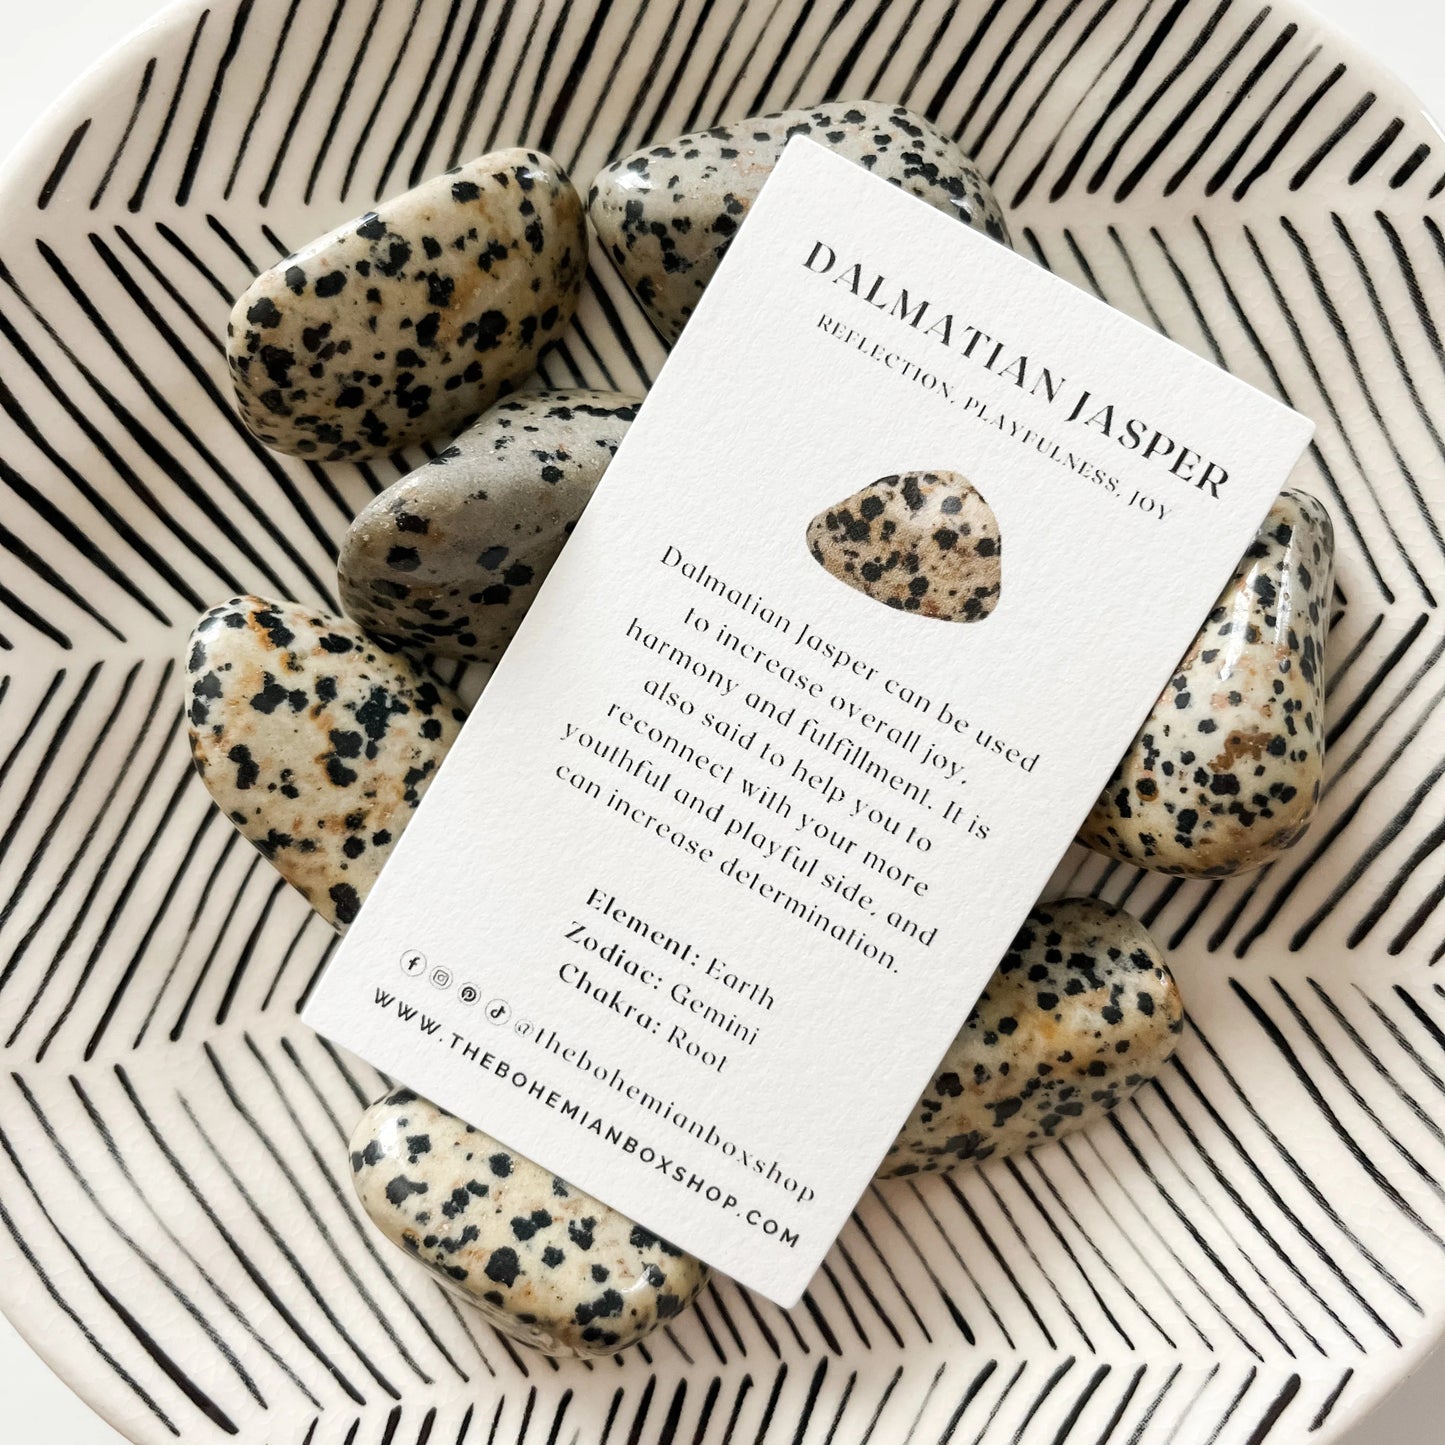 Dalmatian Jasper Tumbled Stone with complementary keepsake information card!